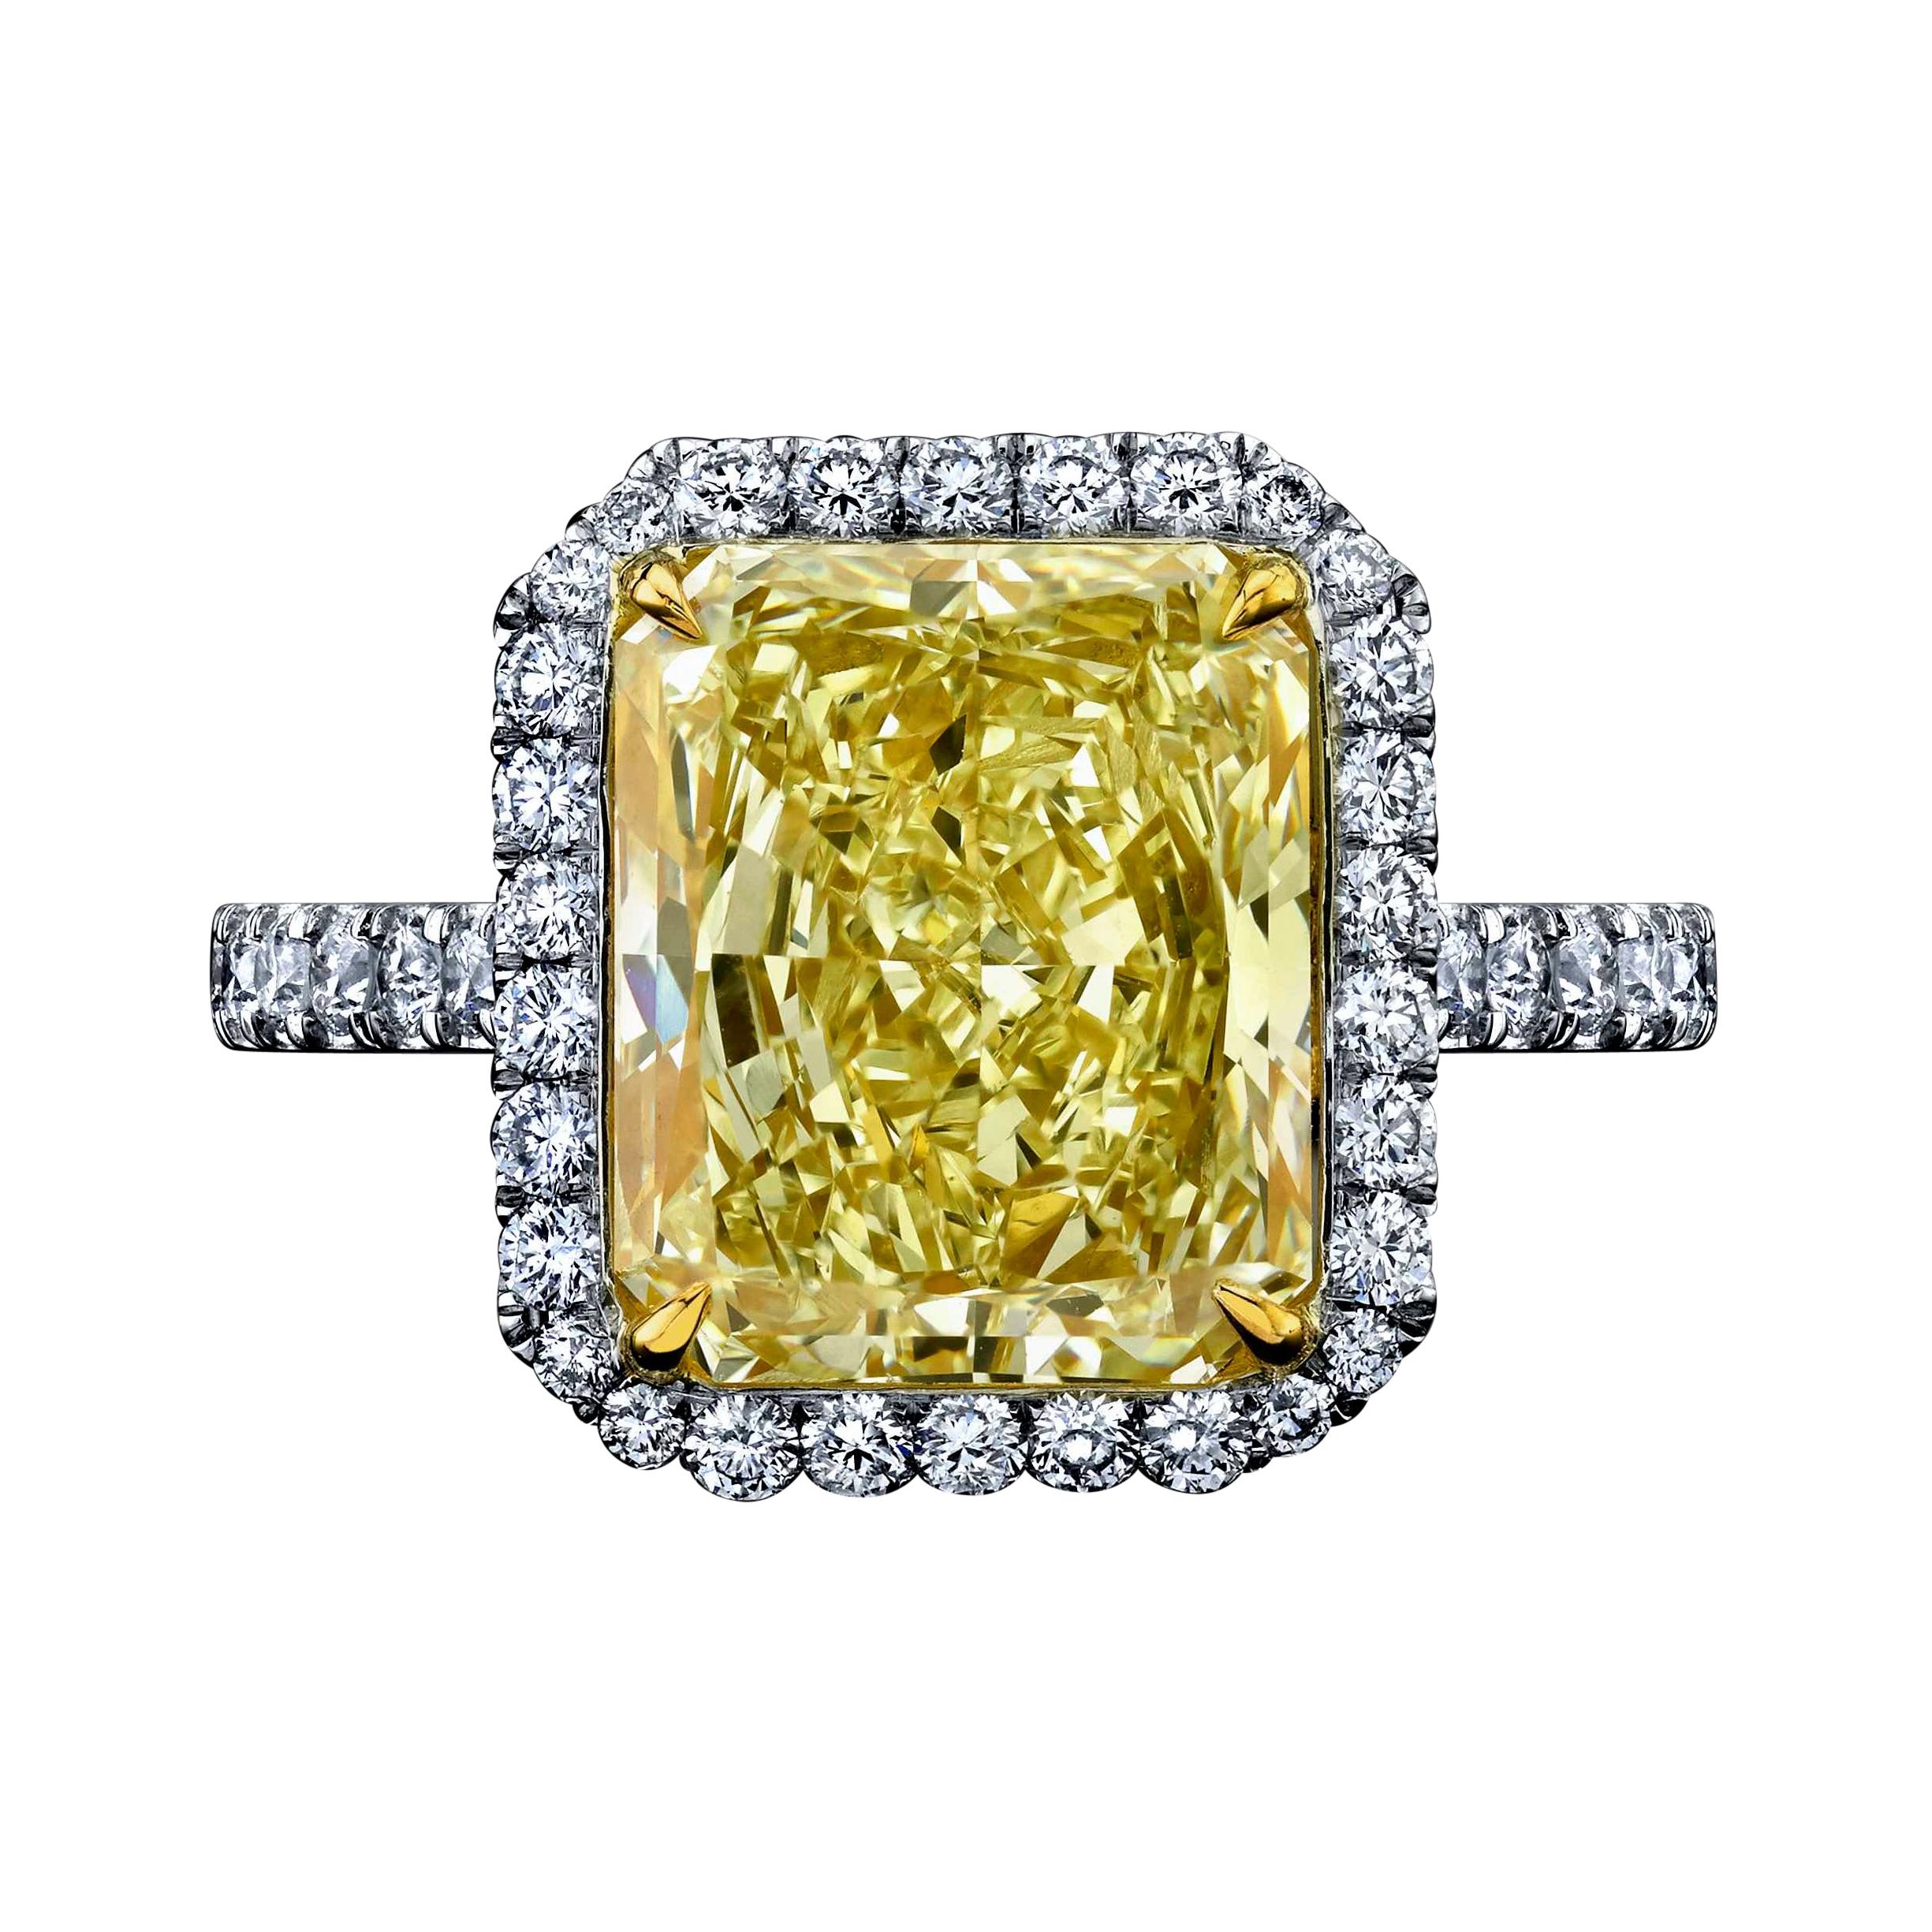 EGL Certified 5.04ct Radiant Fancy Yellow Diamond Ring For Sale